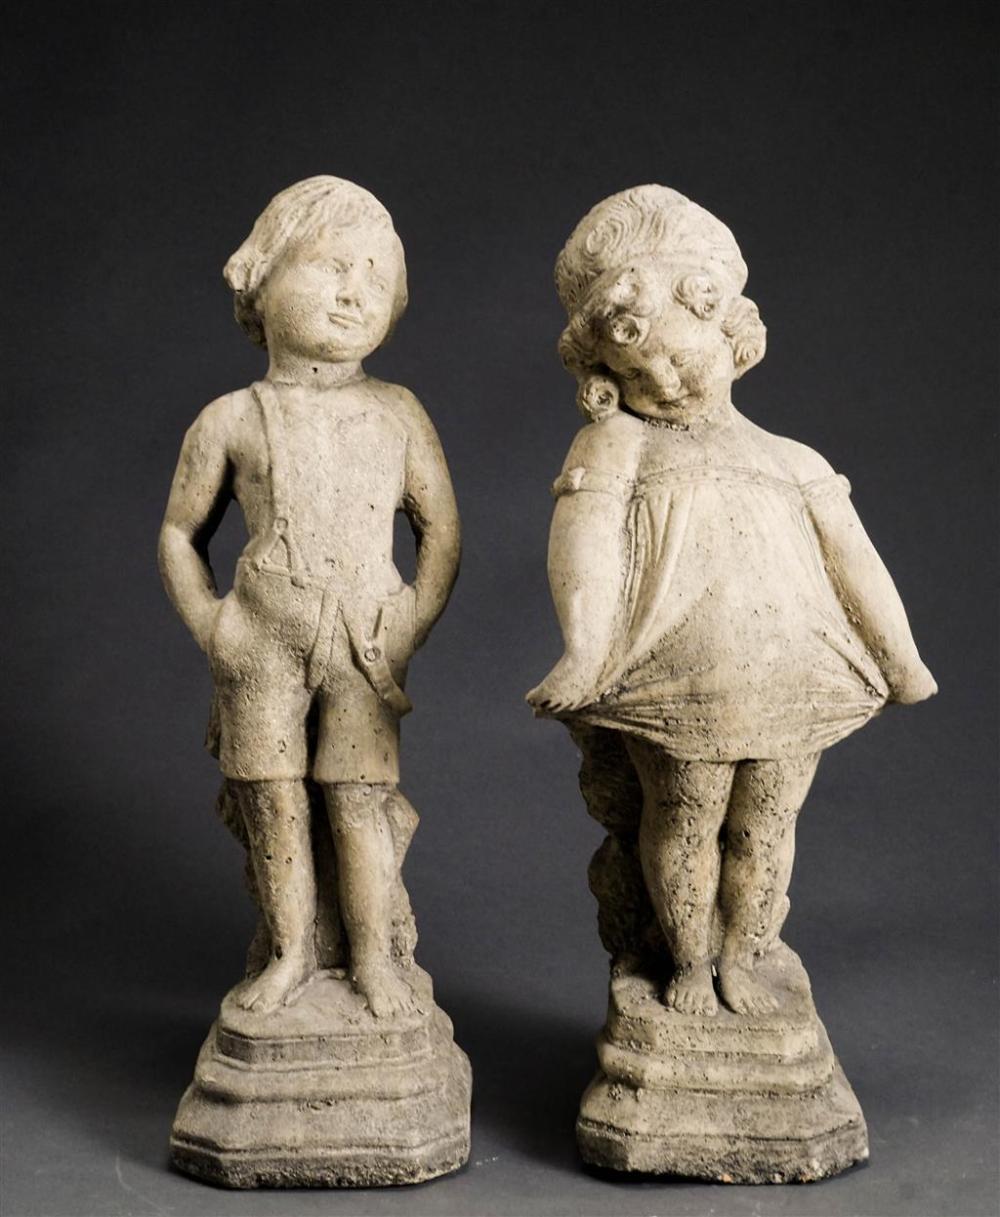 CAST CEMENT FIGURES OF BOY AND GIRLCast